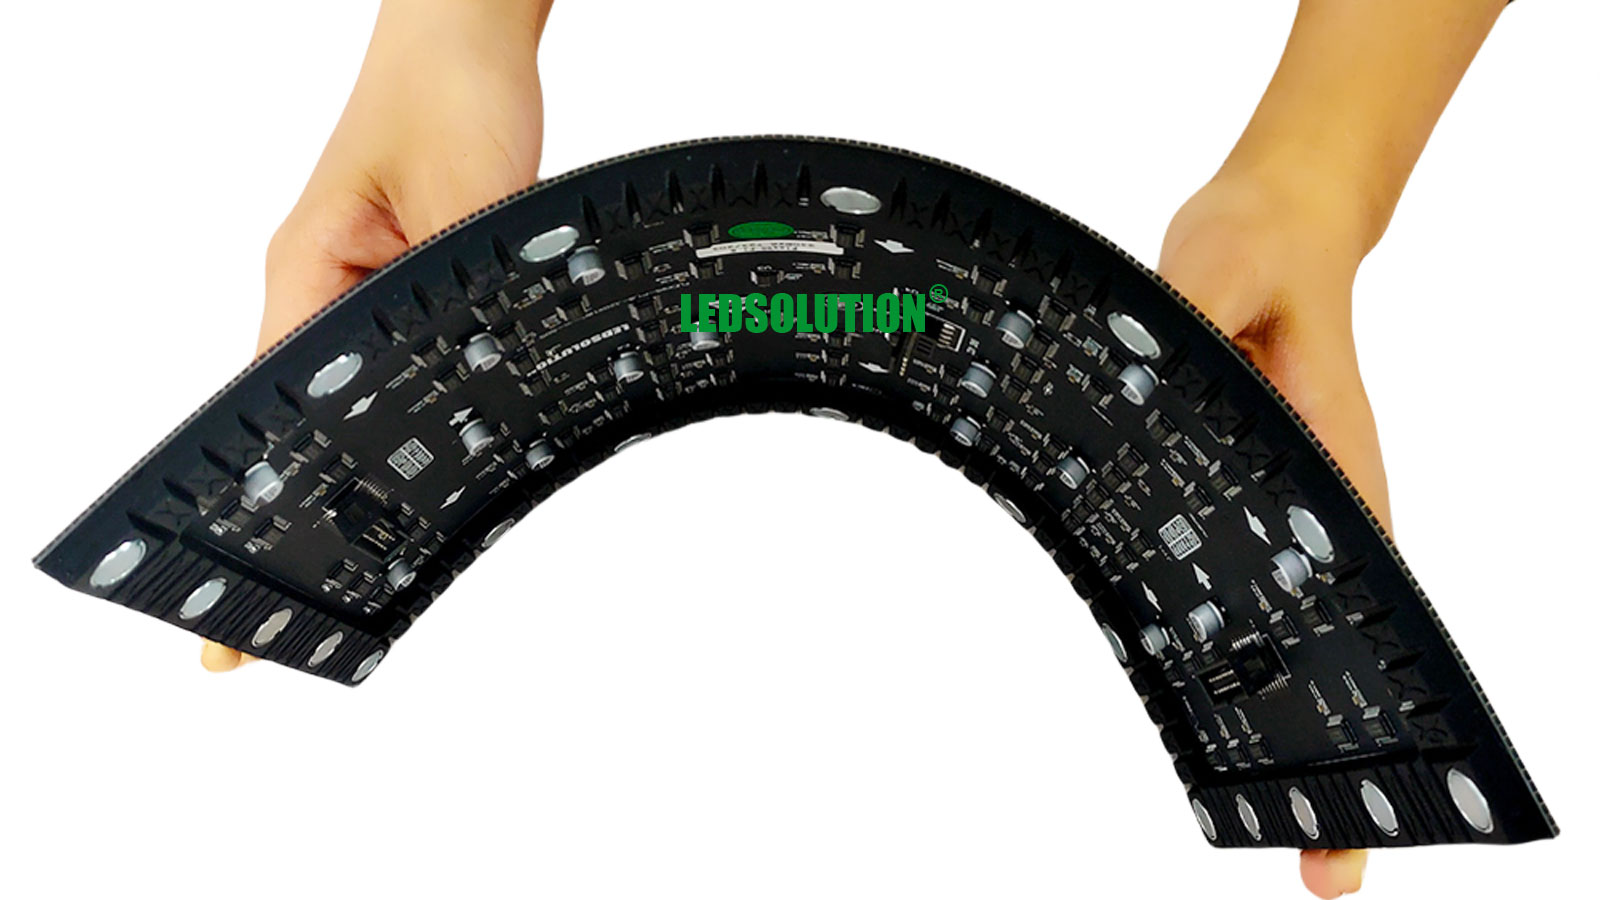 Flex95-Series-320x180mm-16to9-ratio-Flexible-LED-Module-for-Cylinder-LED-Display